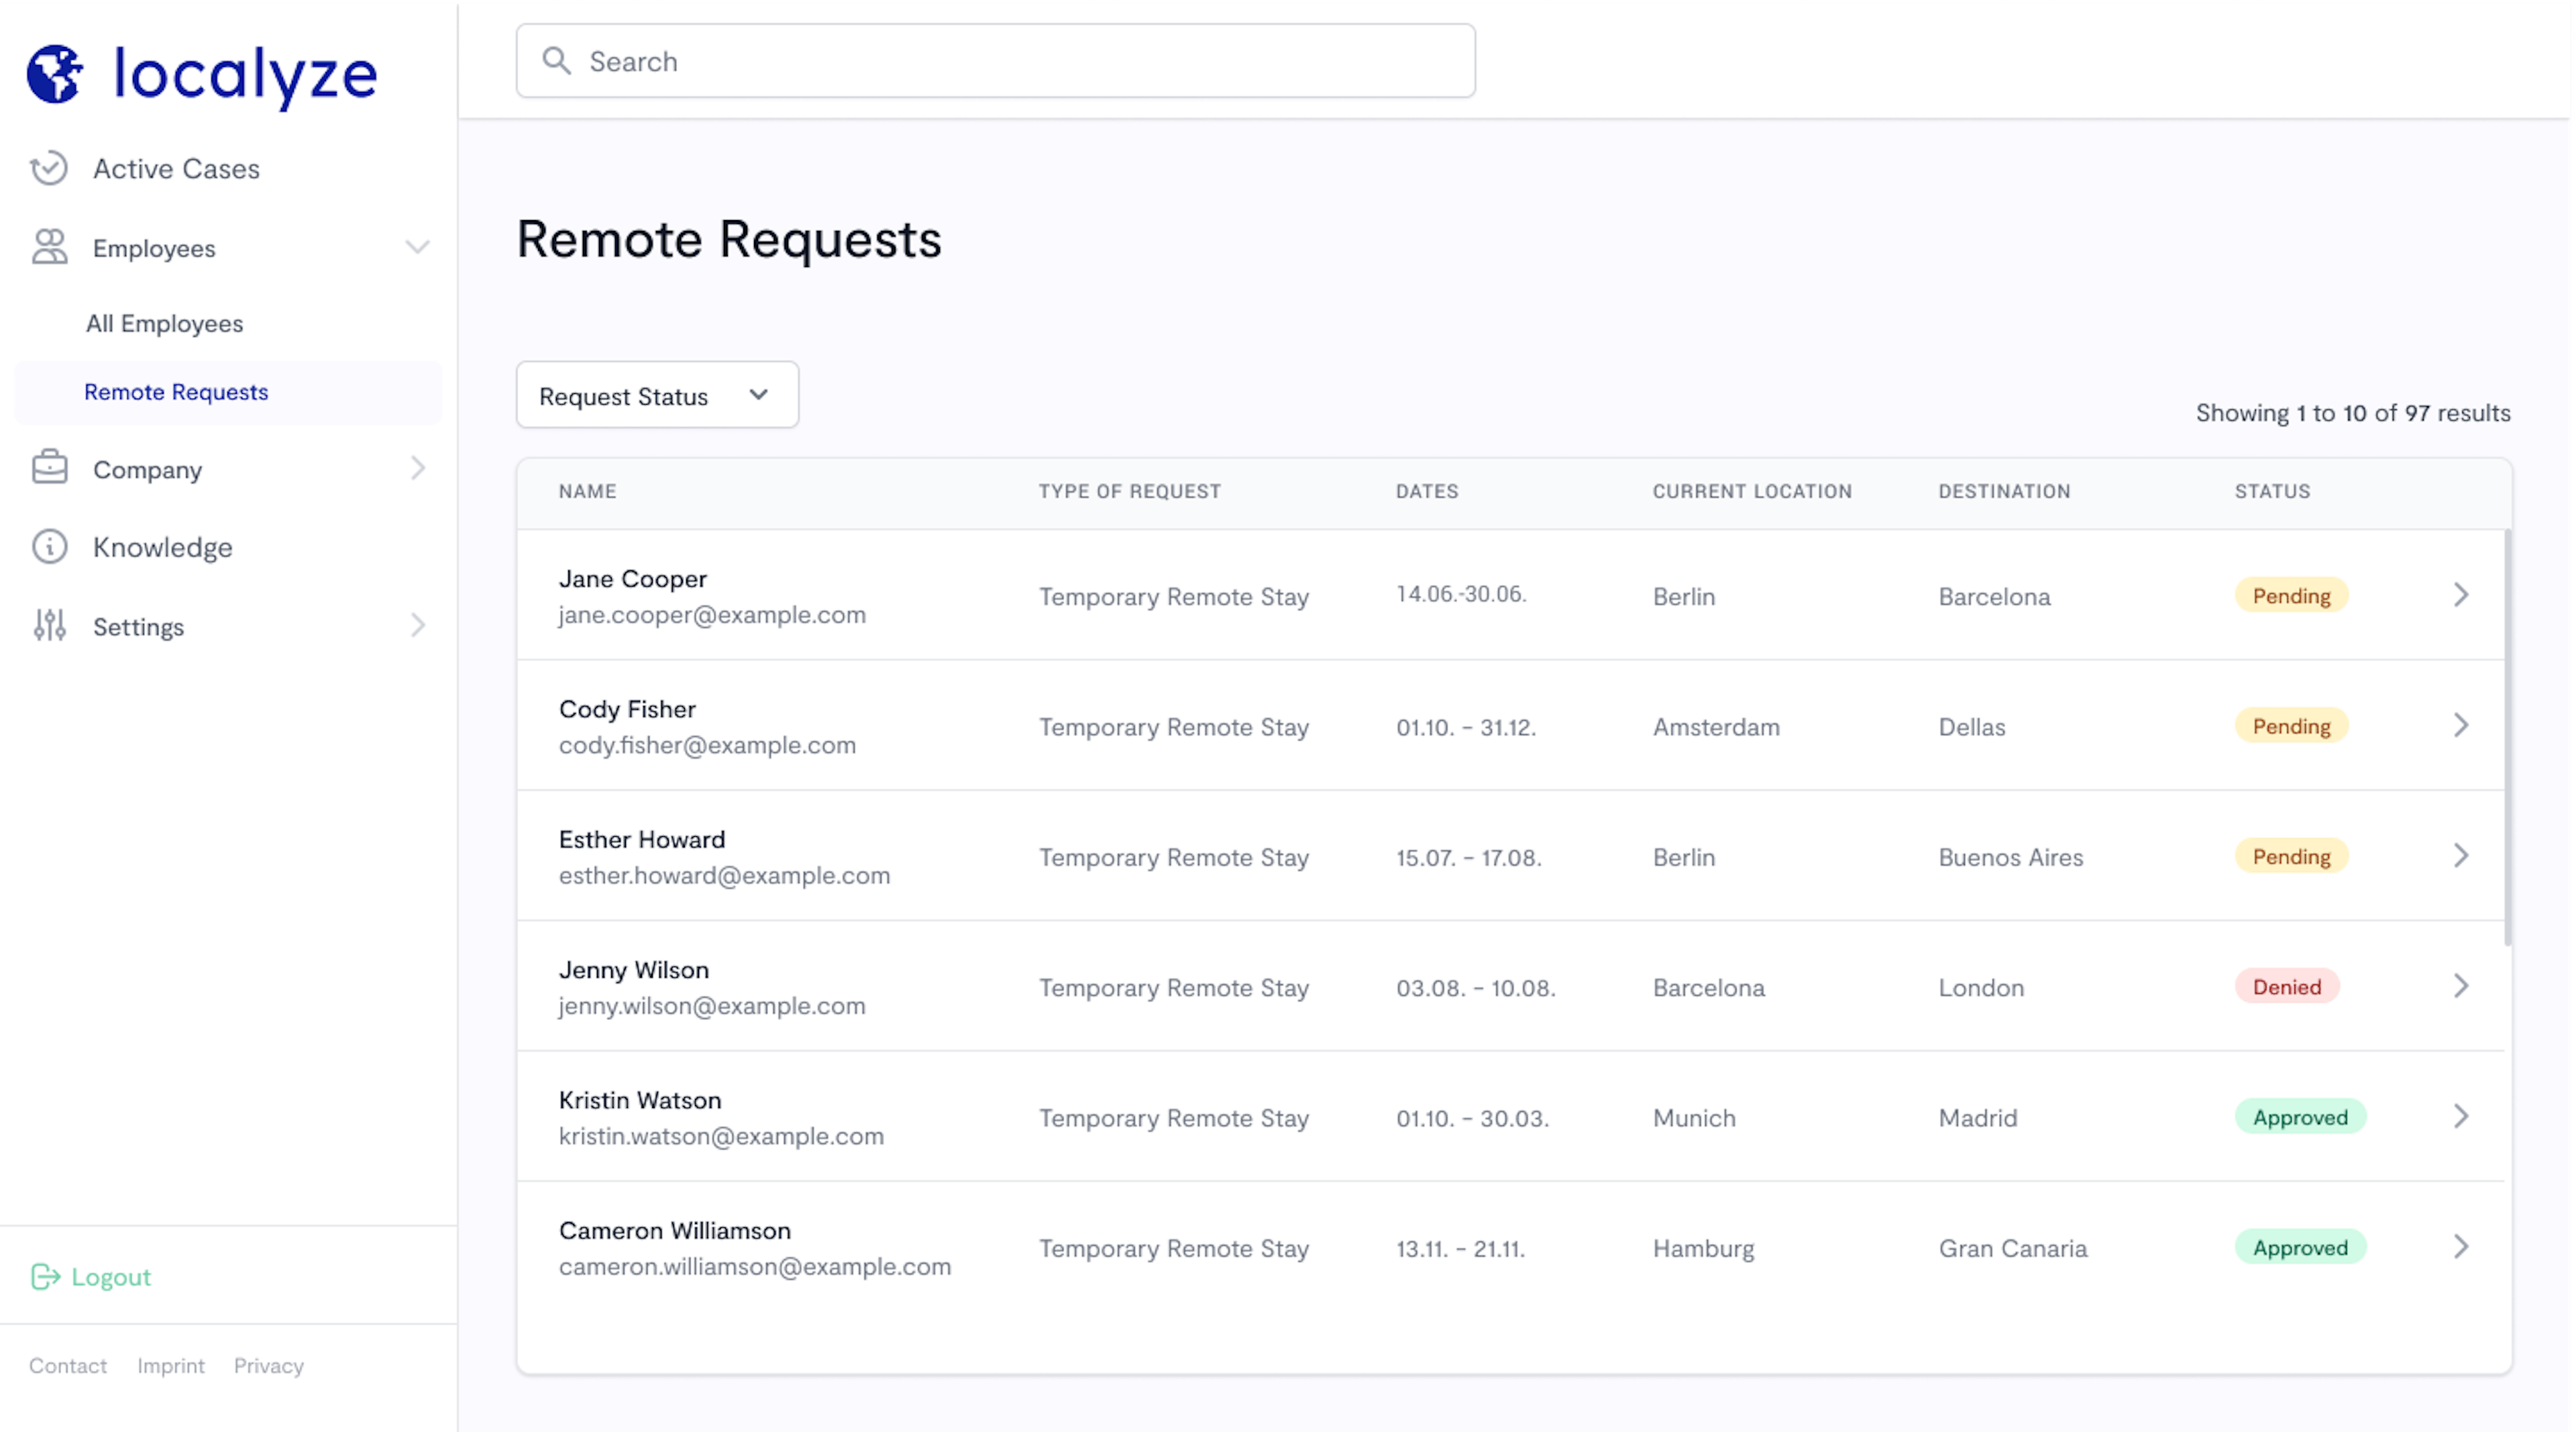 track employee remote work requests in one place with Localyze